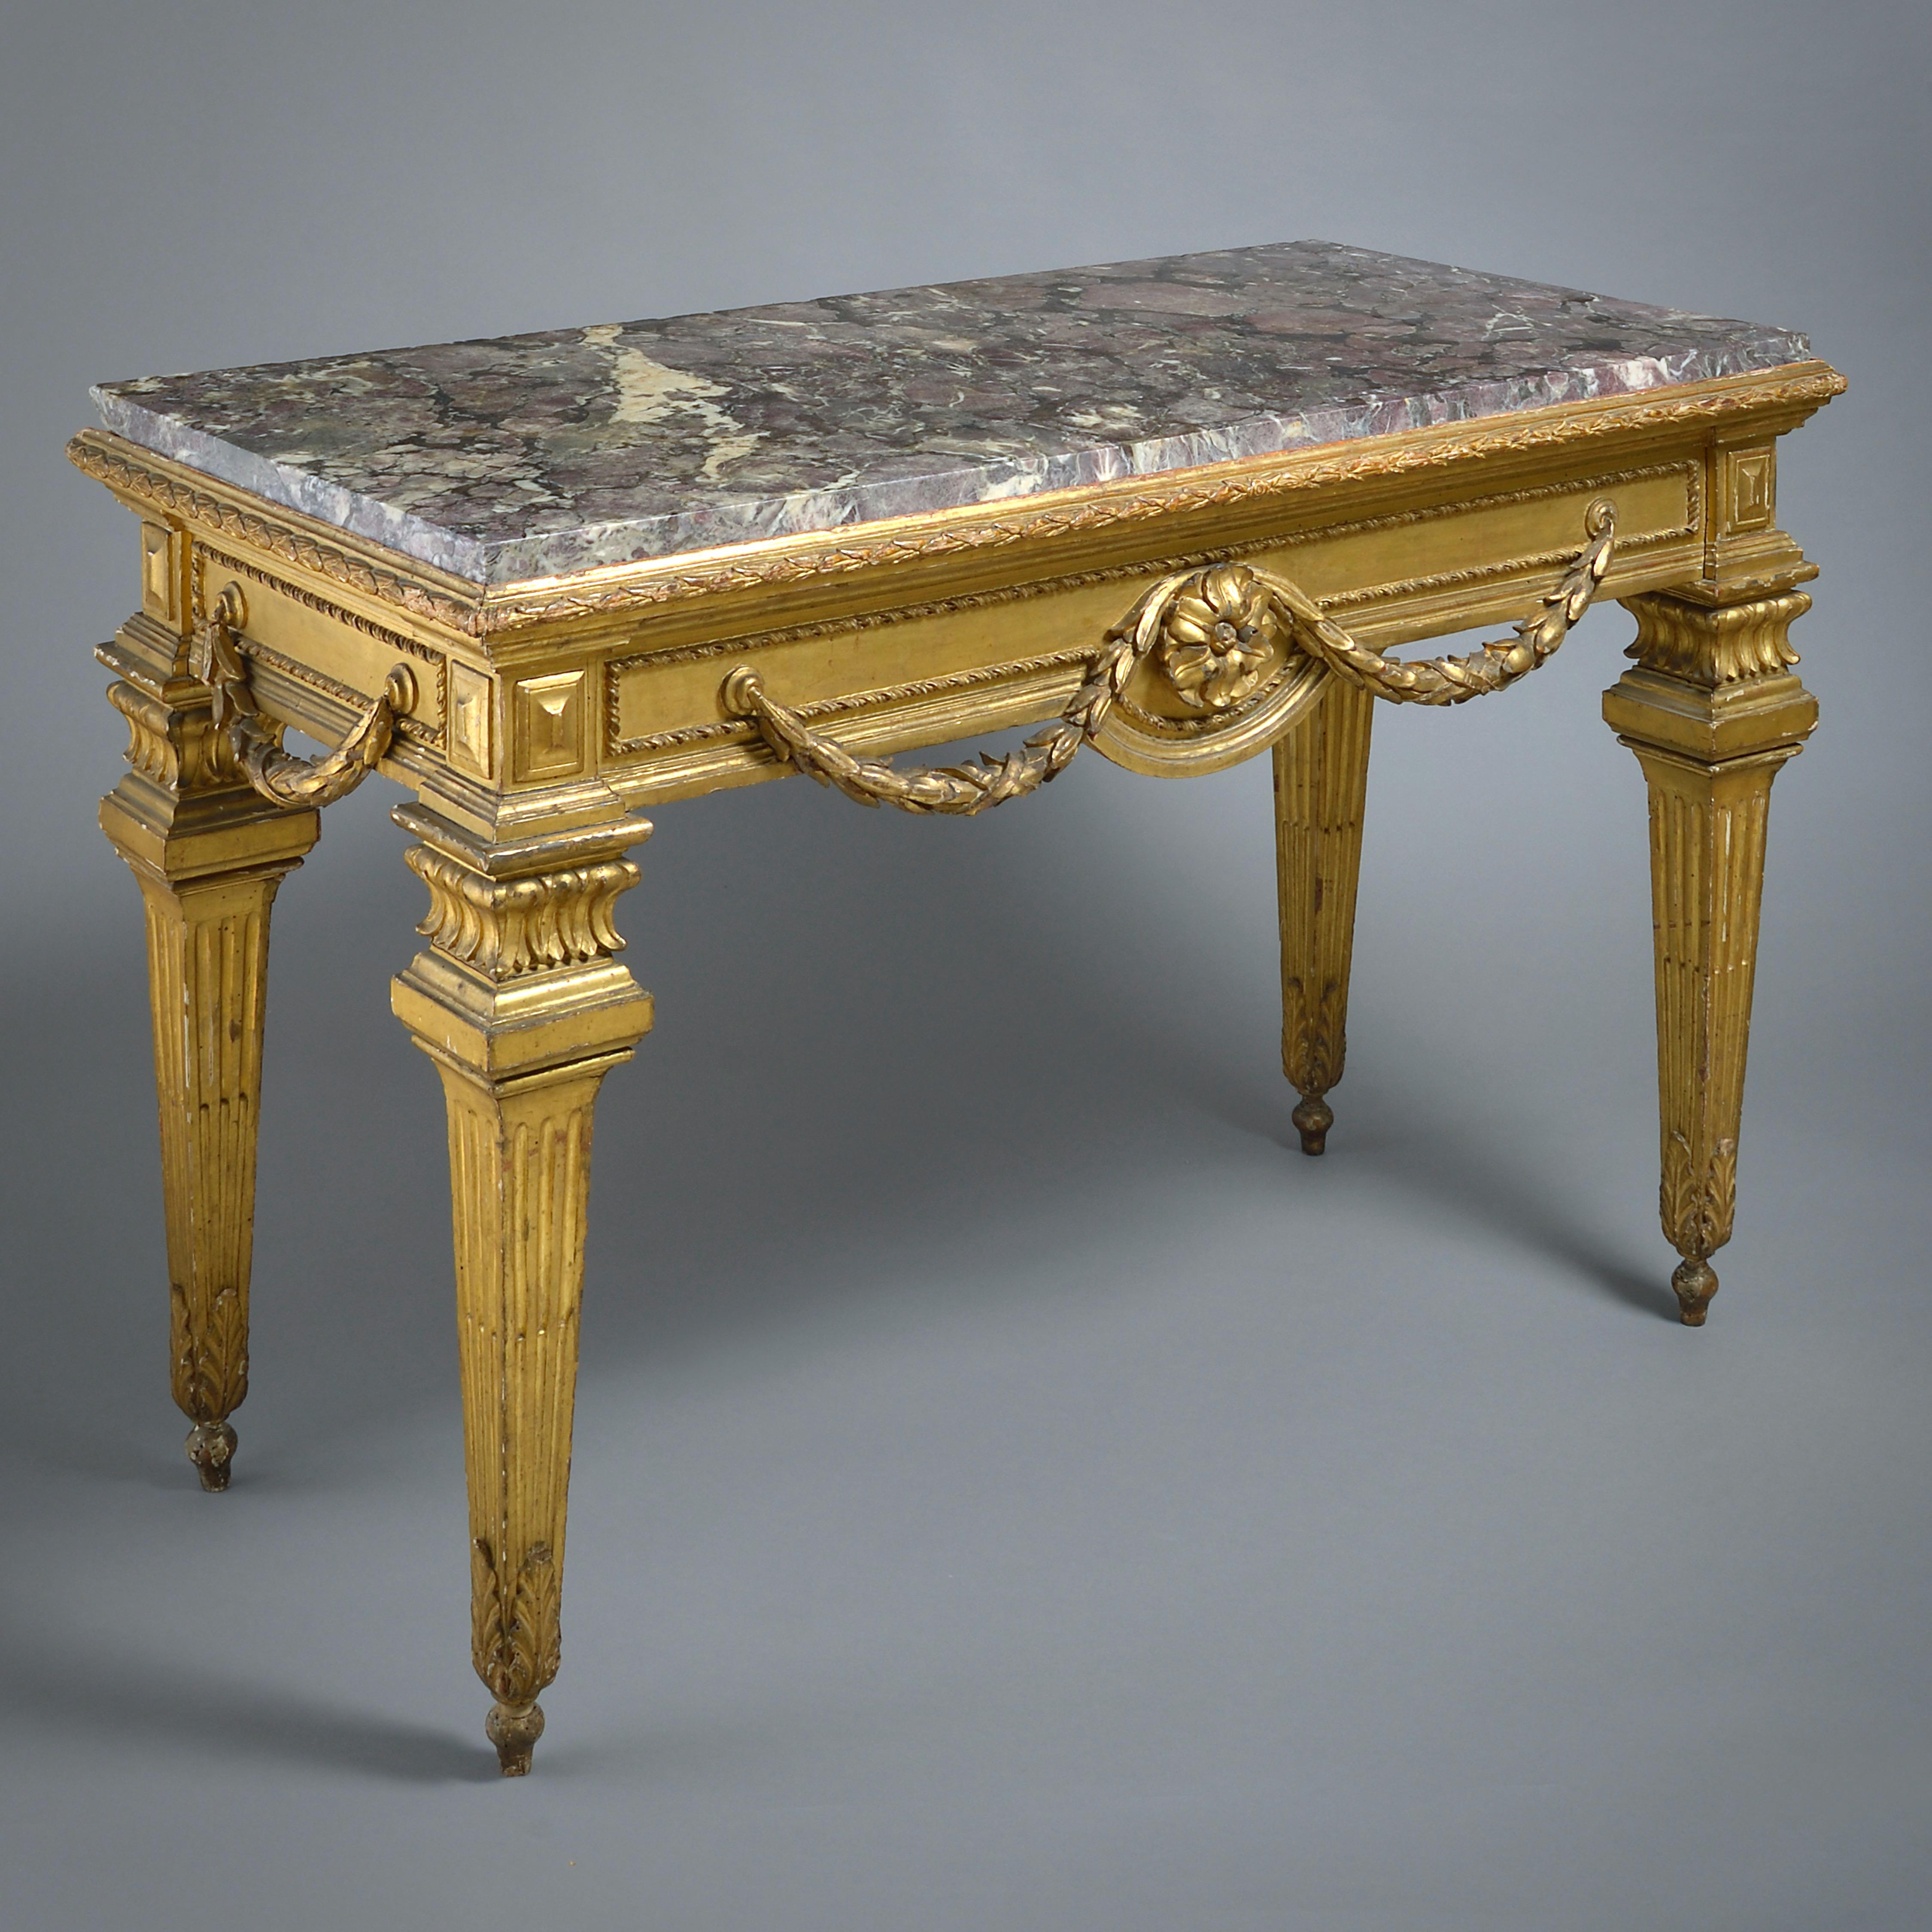 A FINE ROMAN GILTWOOD SIDE TABLE WITH ITS ORIGINAL BRECHE VIOLETTE MARBLE TOP, CIRCA 1775.

Retains its original gilding.